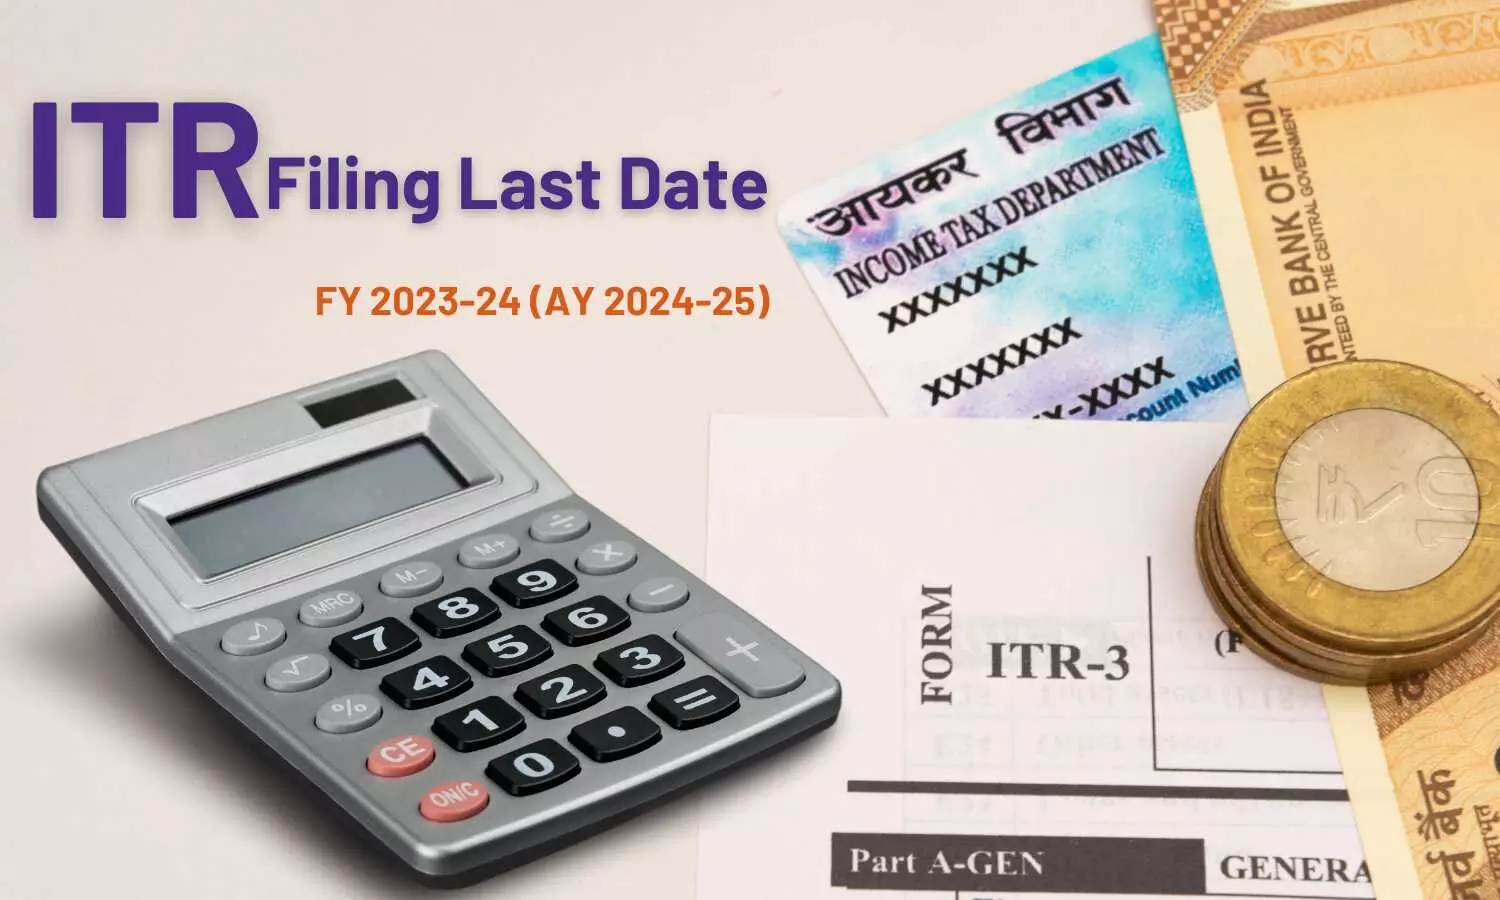 Are you aware of the ITR filing last date, FY 2023-24 (AY 2024-25)?